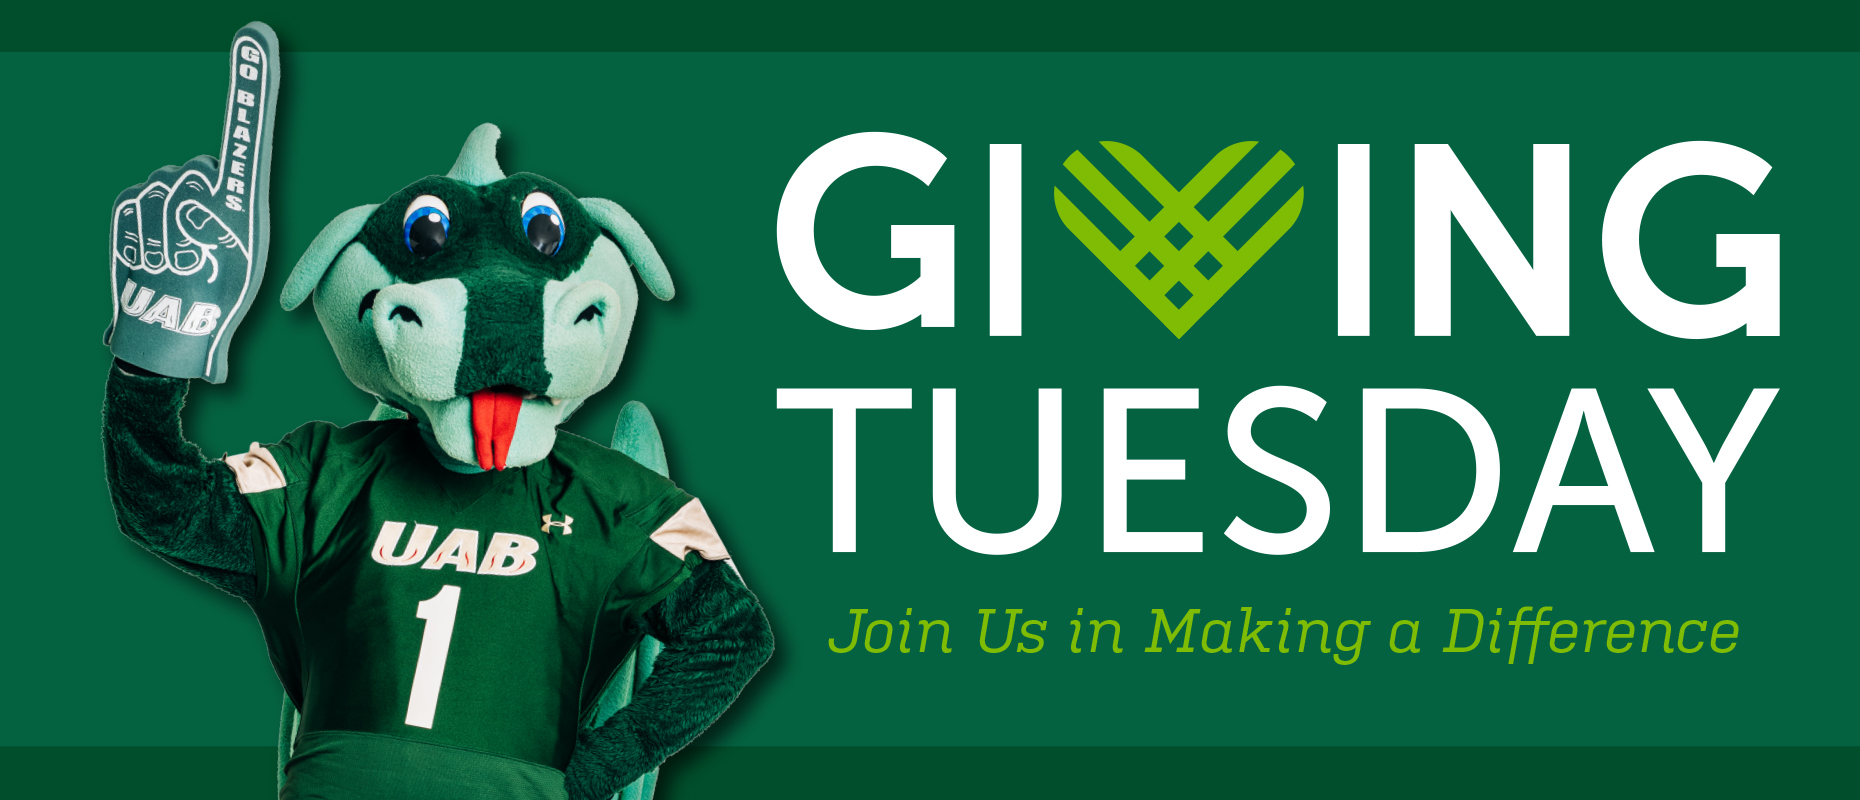 Giving Tuesday: Join us in making a difference.